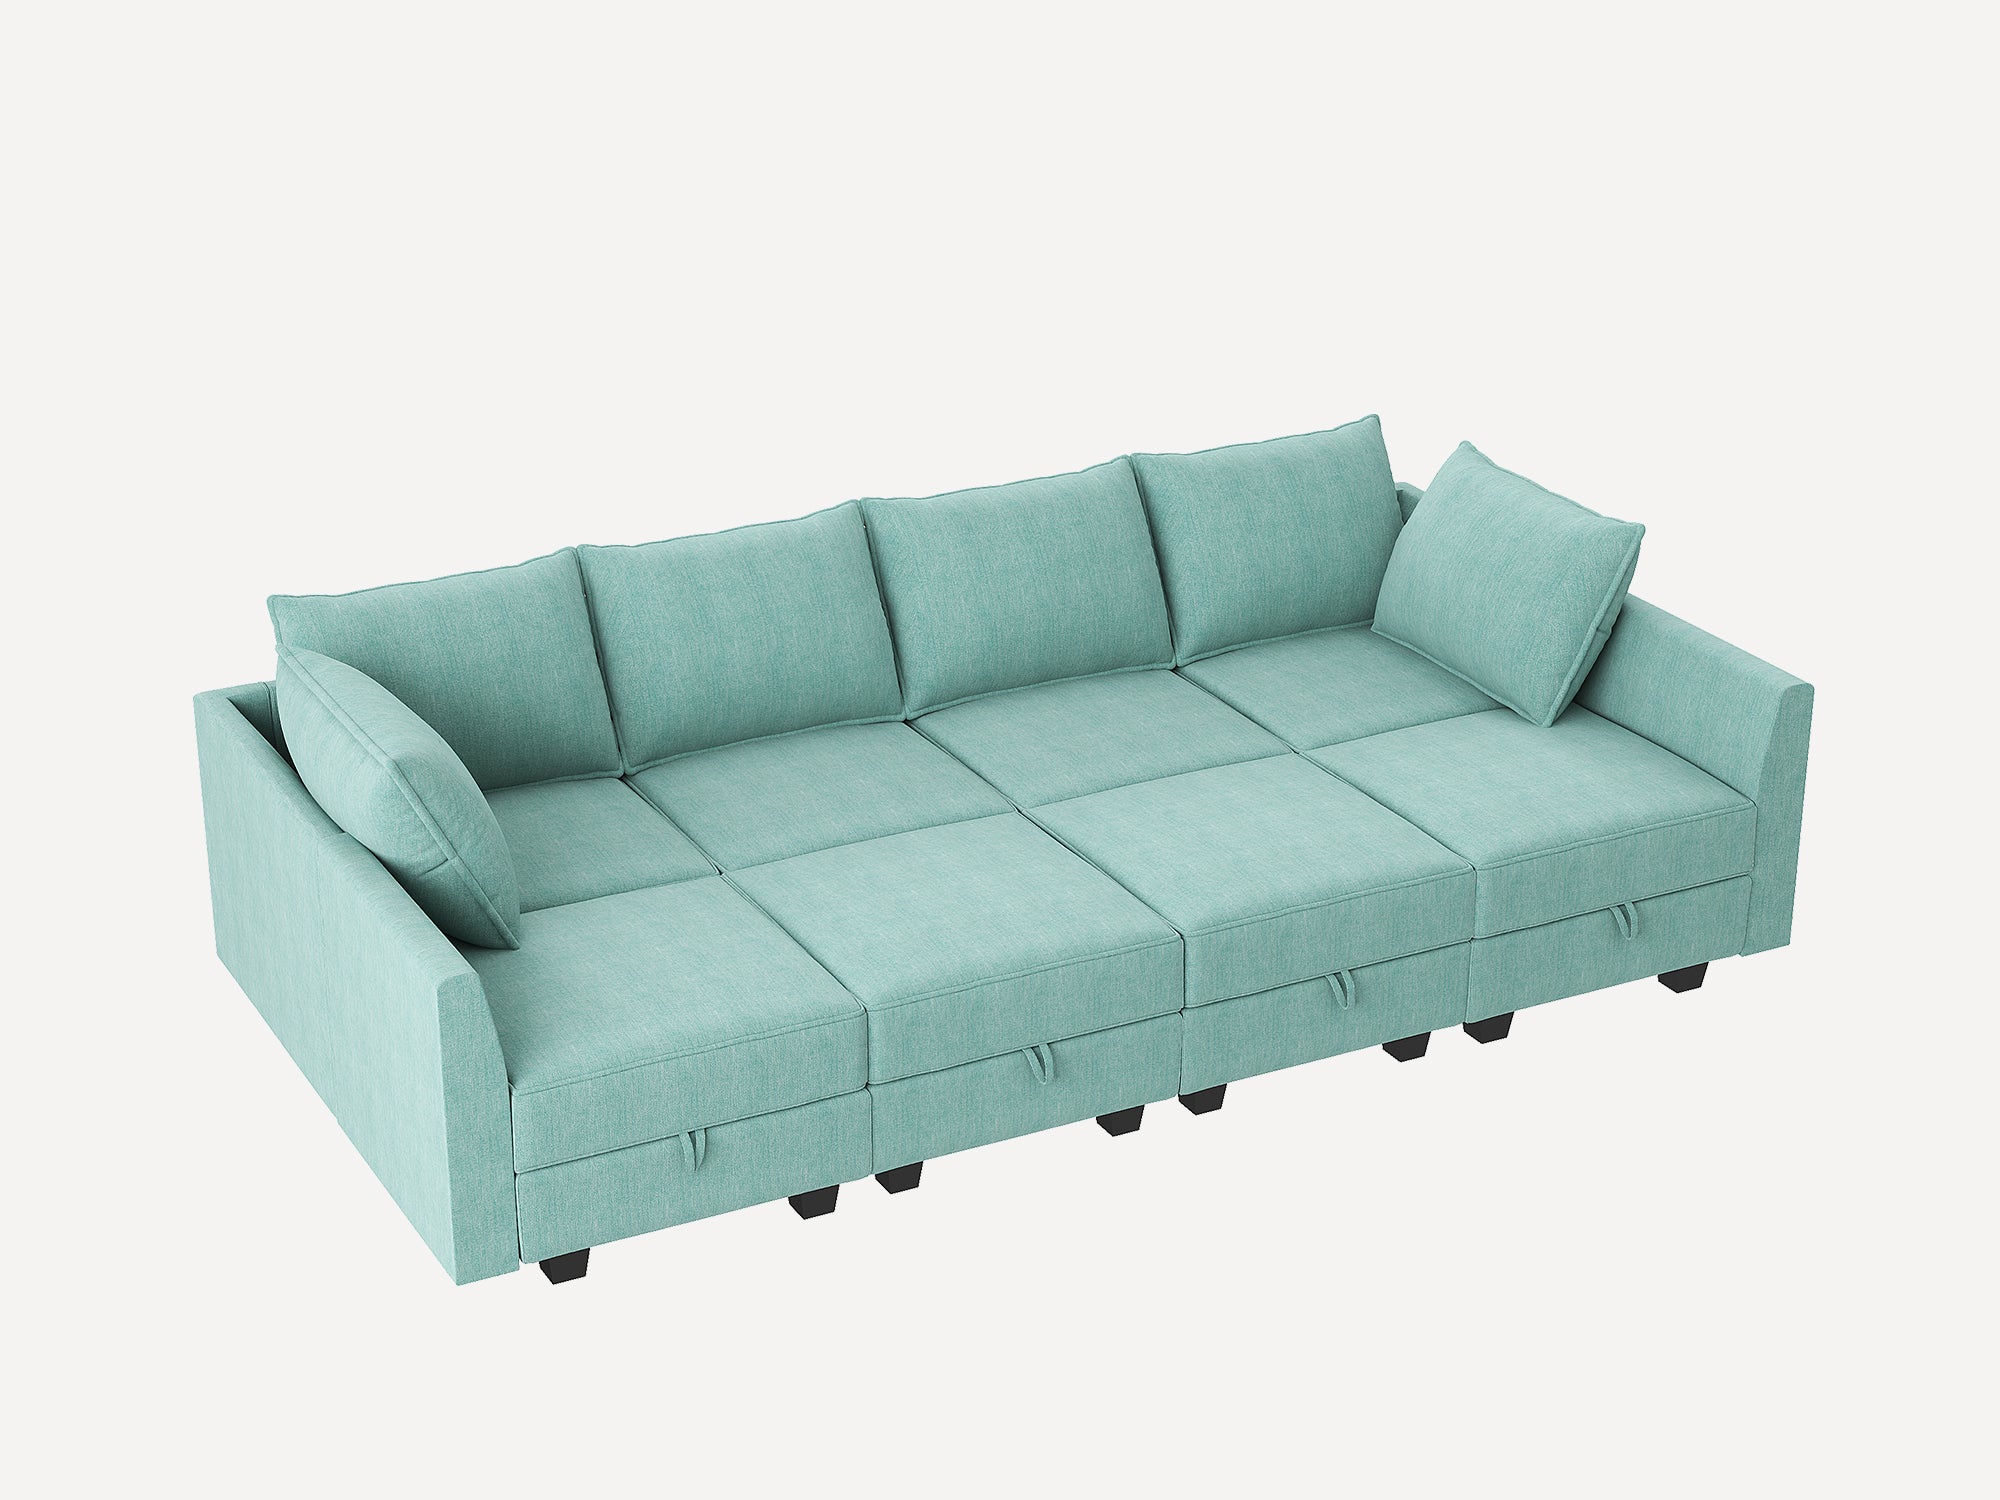 HONBAY Classic Modular Sofa Sectional Bed Couch with Storage & Convertible Sleeper Sofa